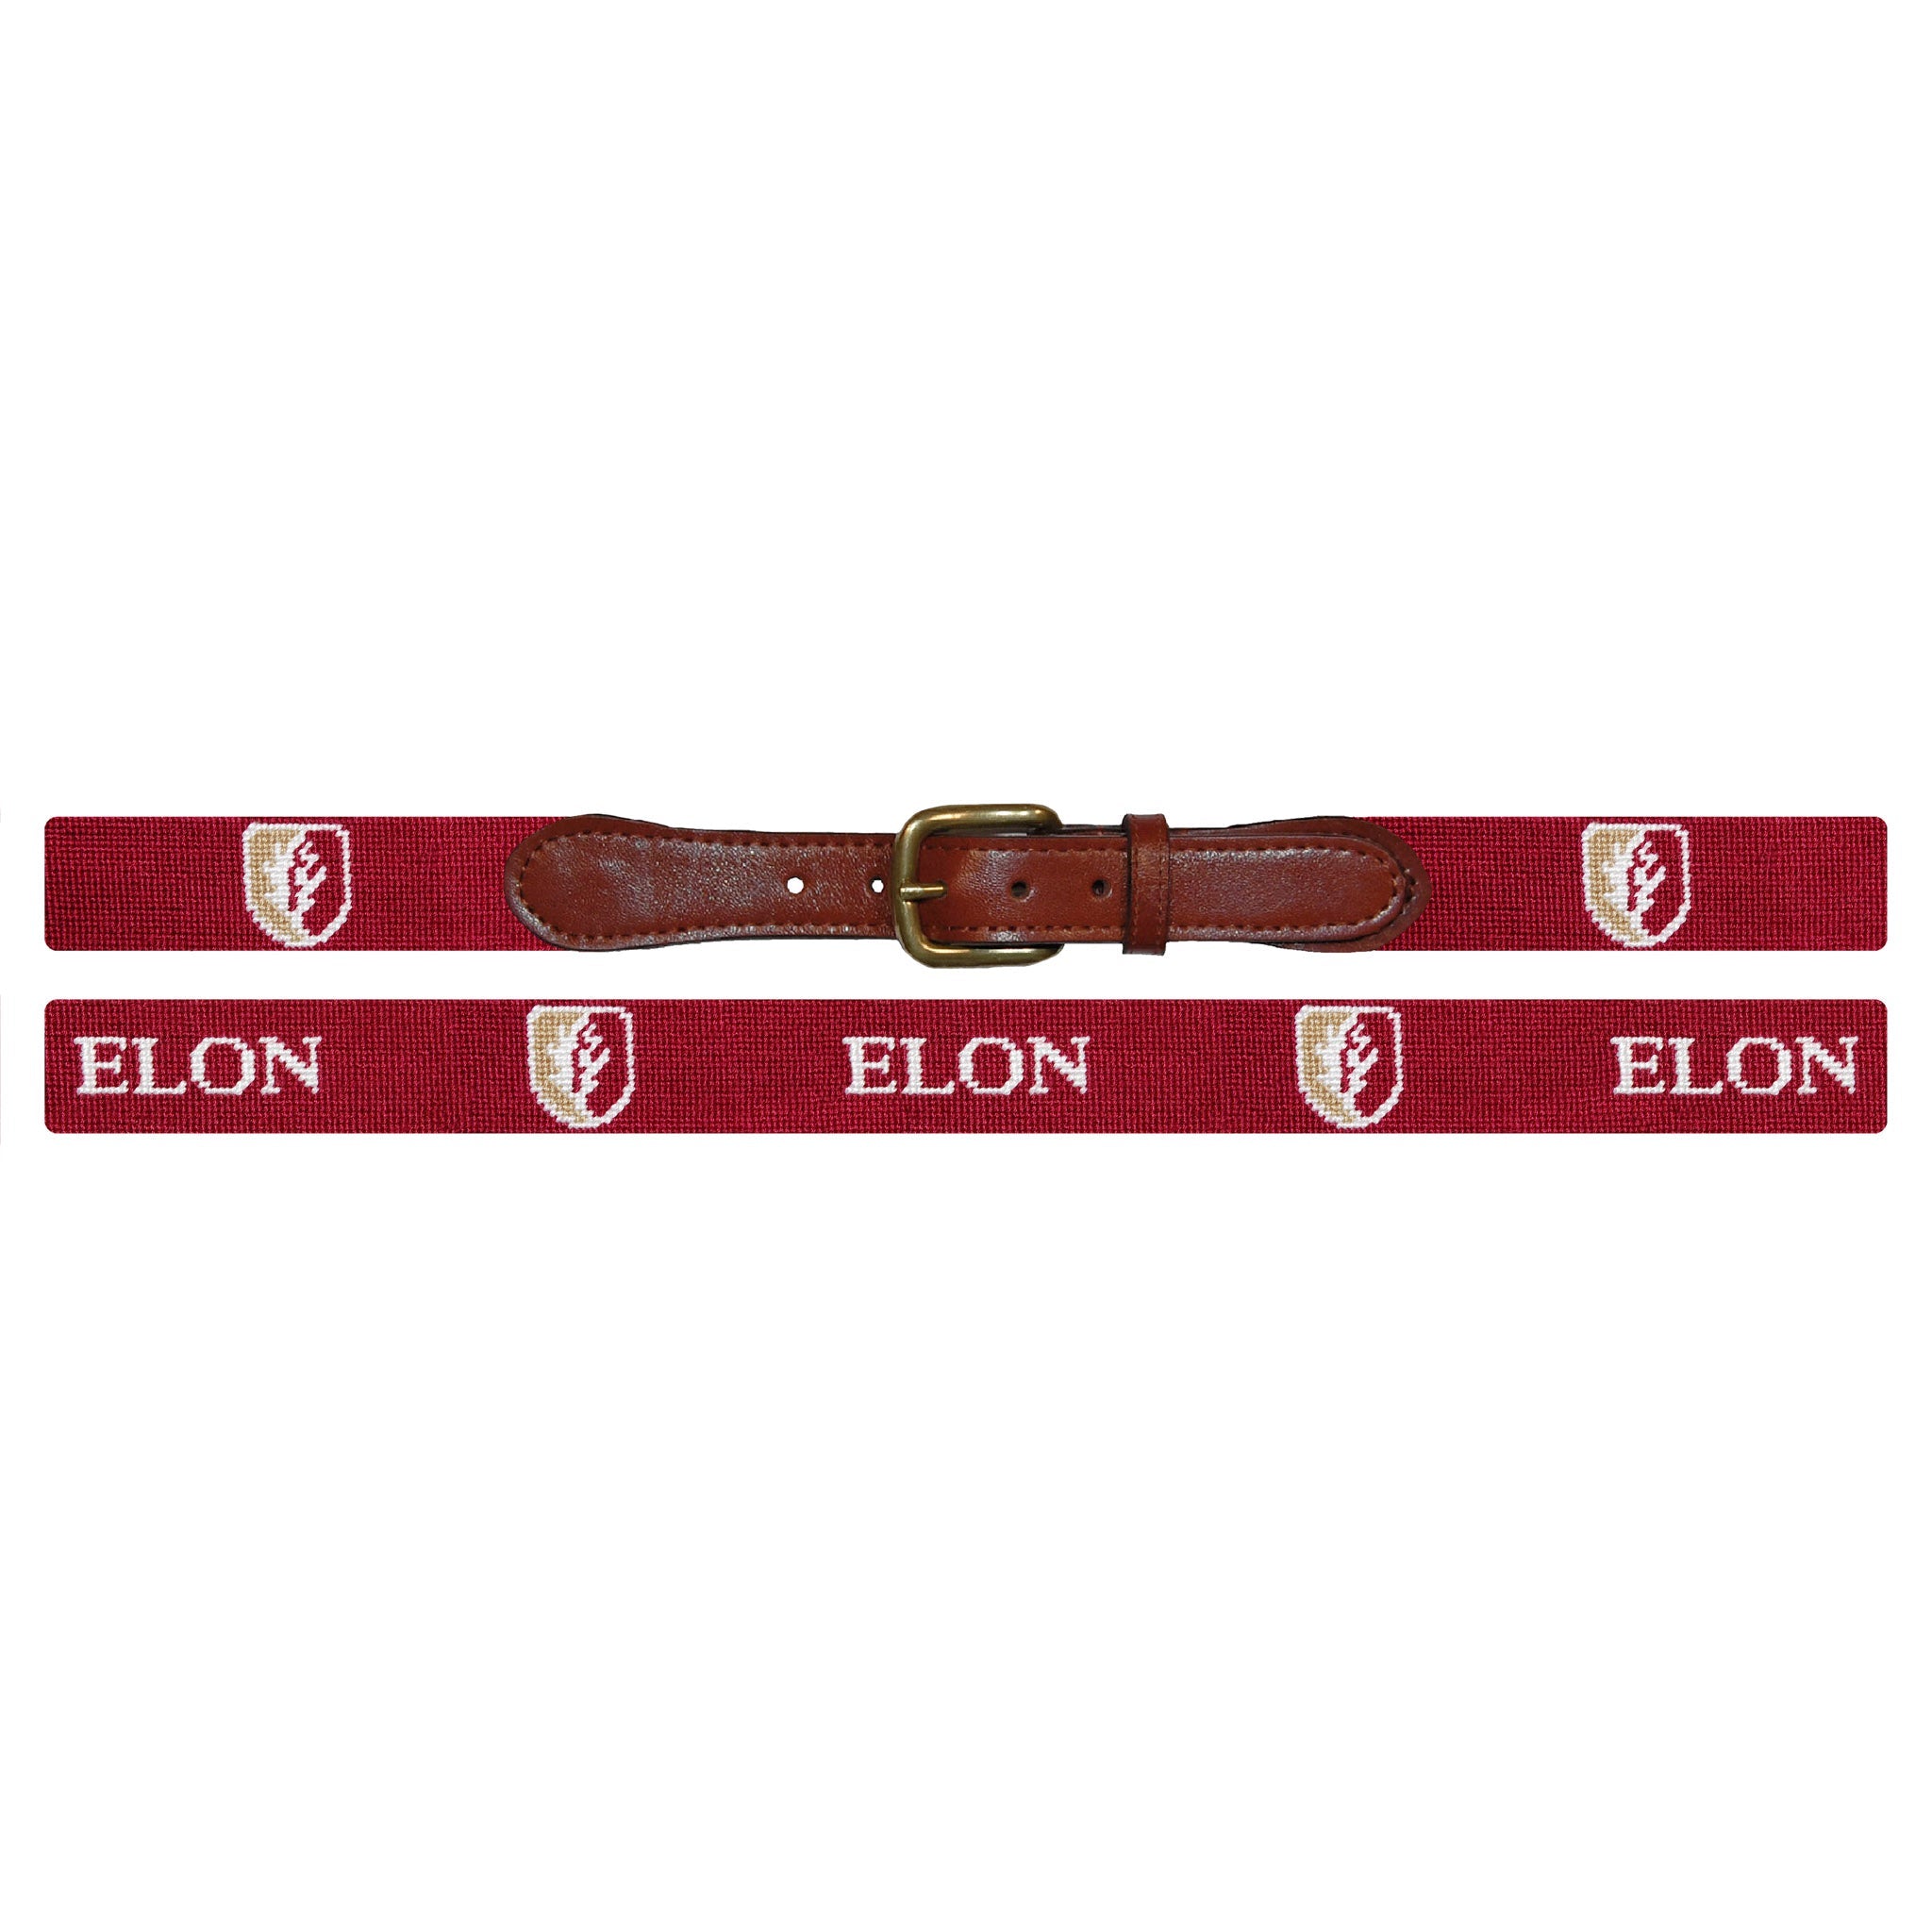 Smathers and Branson Elon Needlepoint Belt Laid Out 